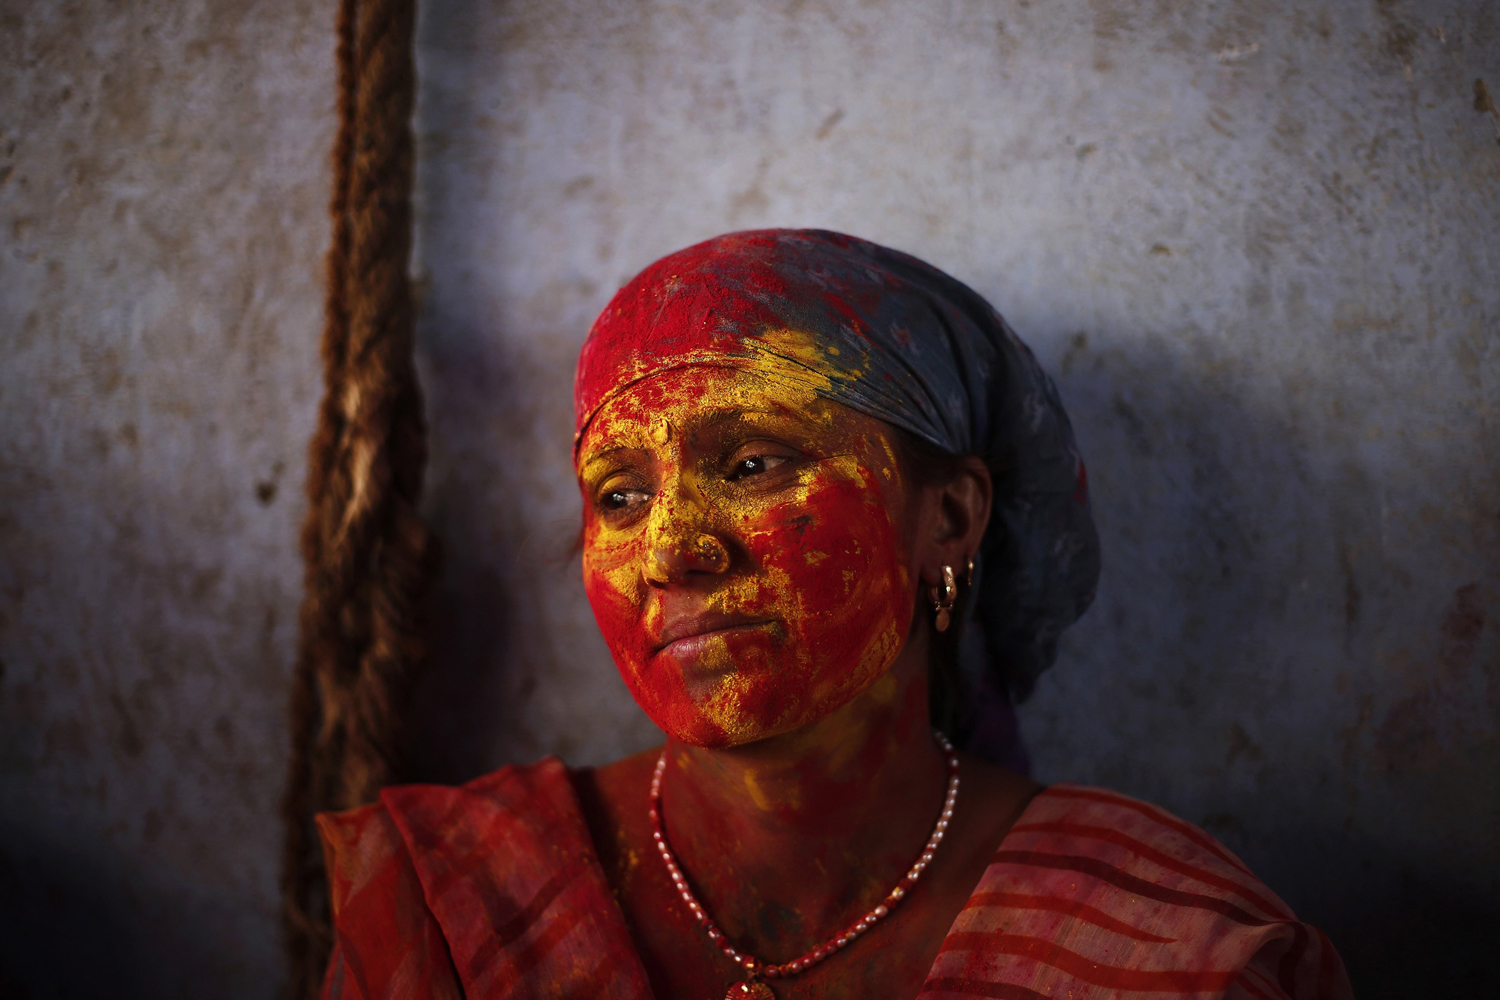 A Hindu woman is seen covered with coloured powder at a temple during "Lathmar Holi" at Nandgaon village